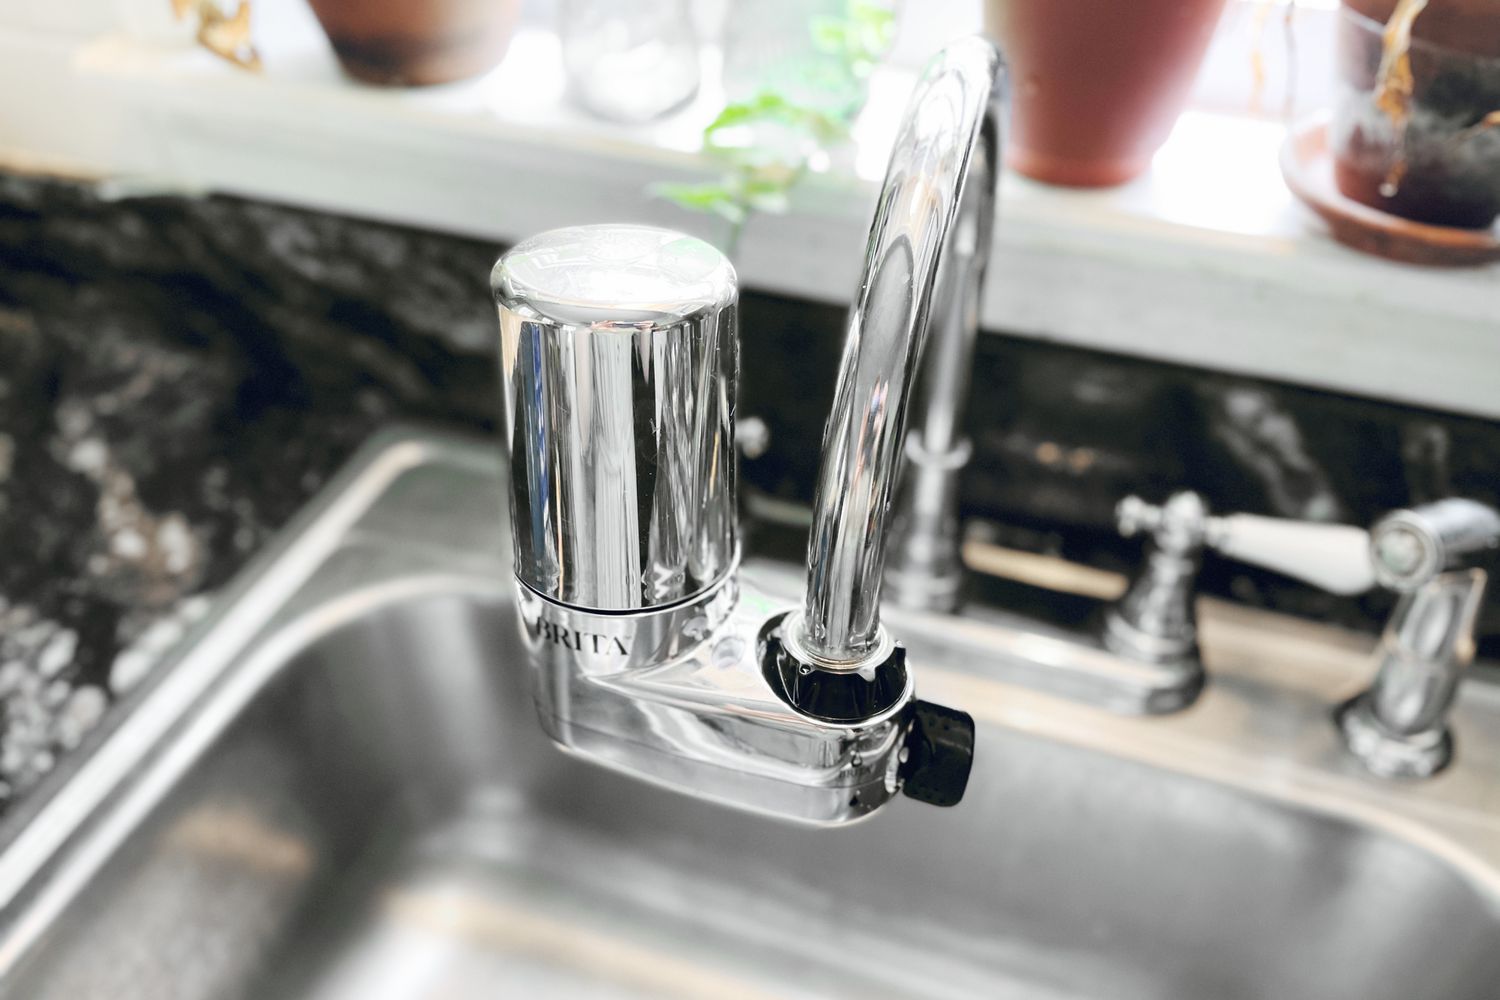 How To Install A Water Filter Faucet